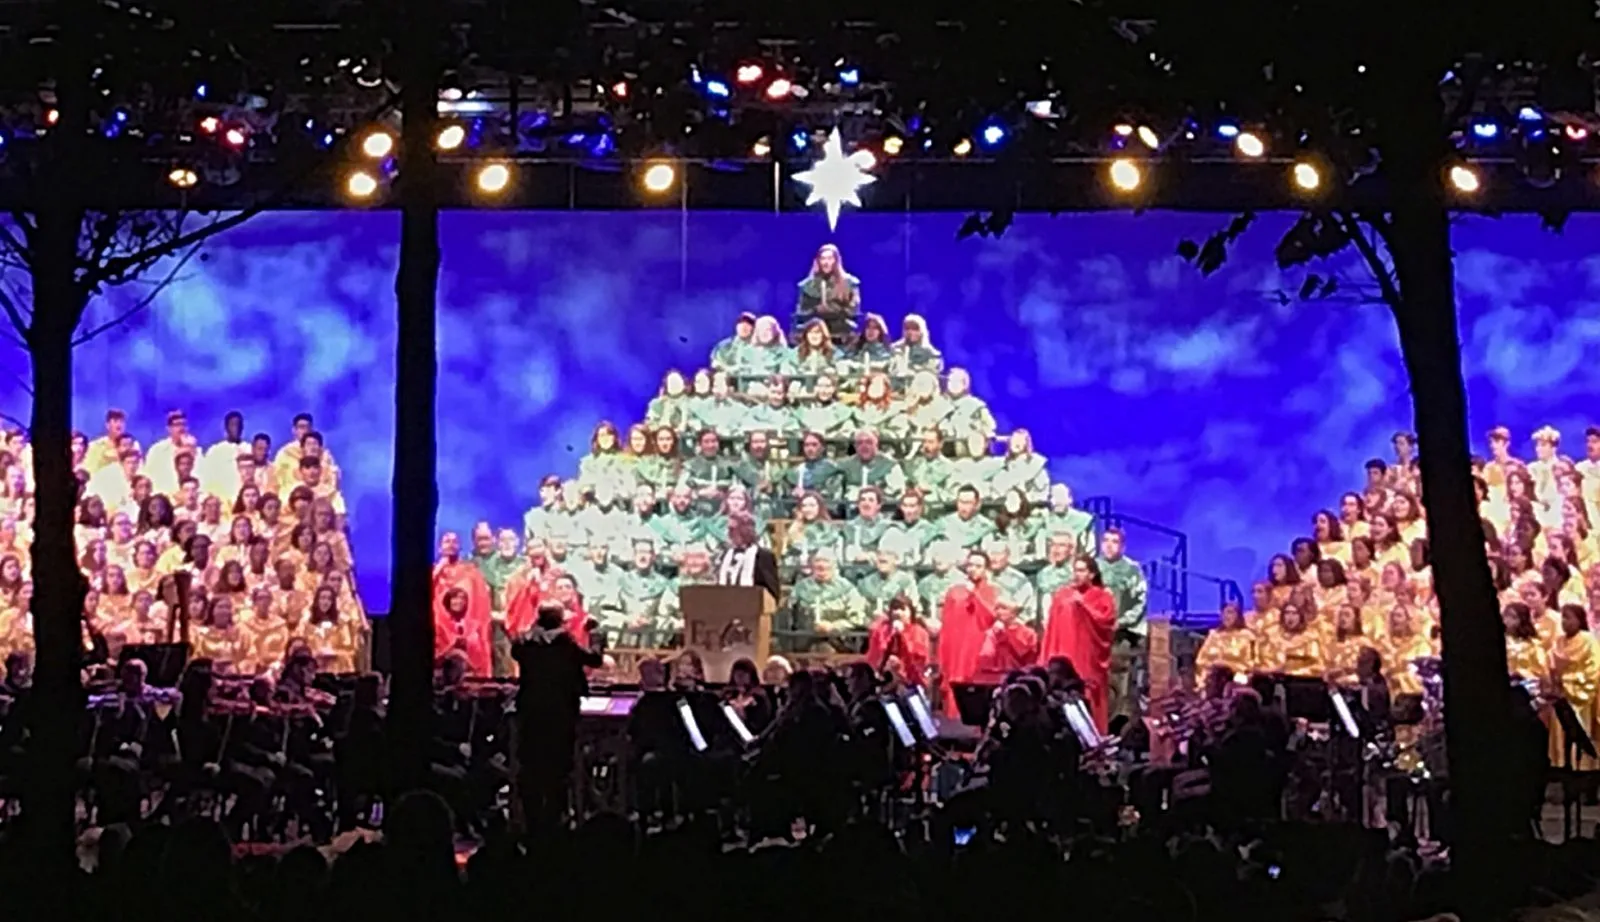 candlelight processional performance